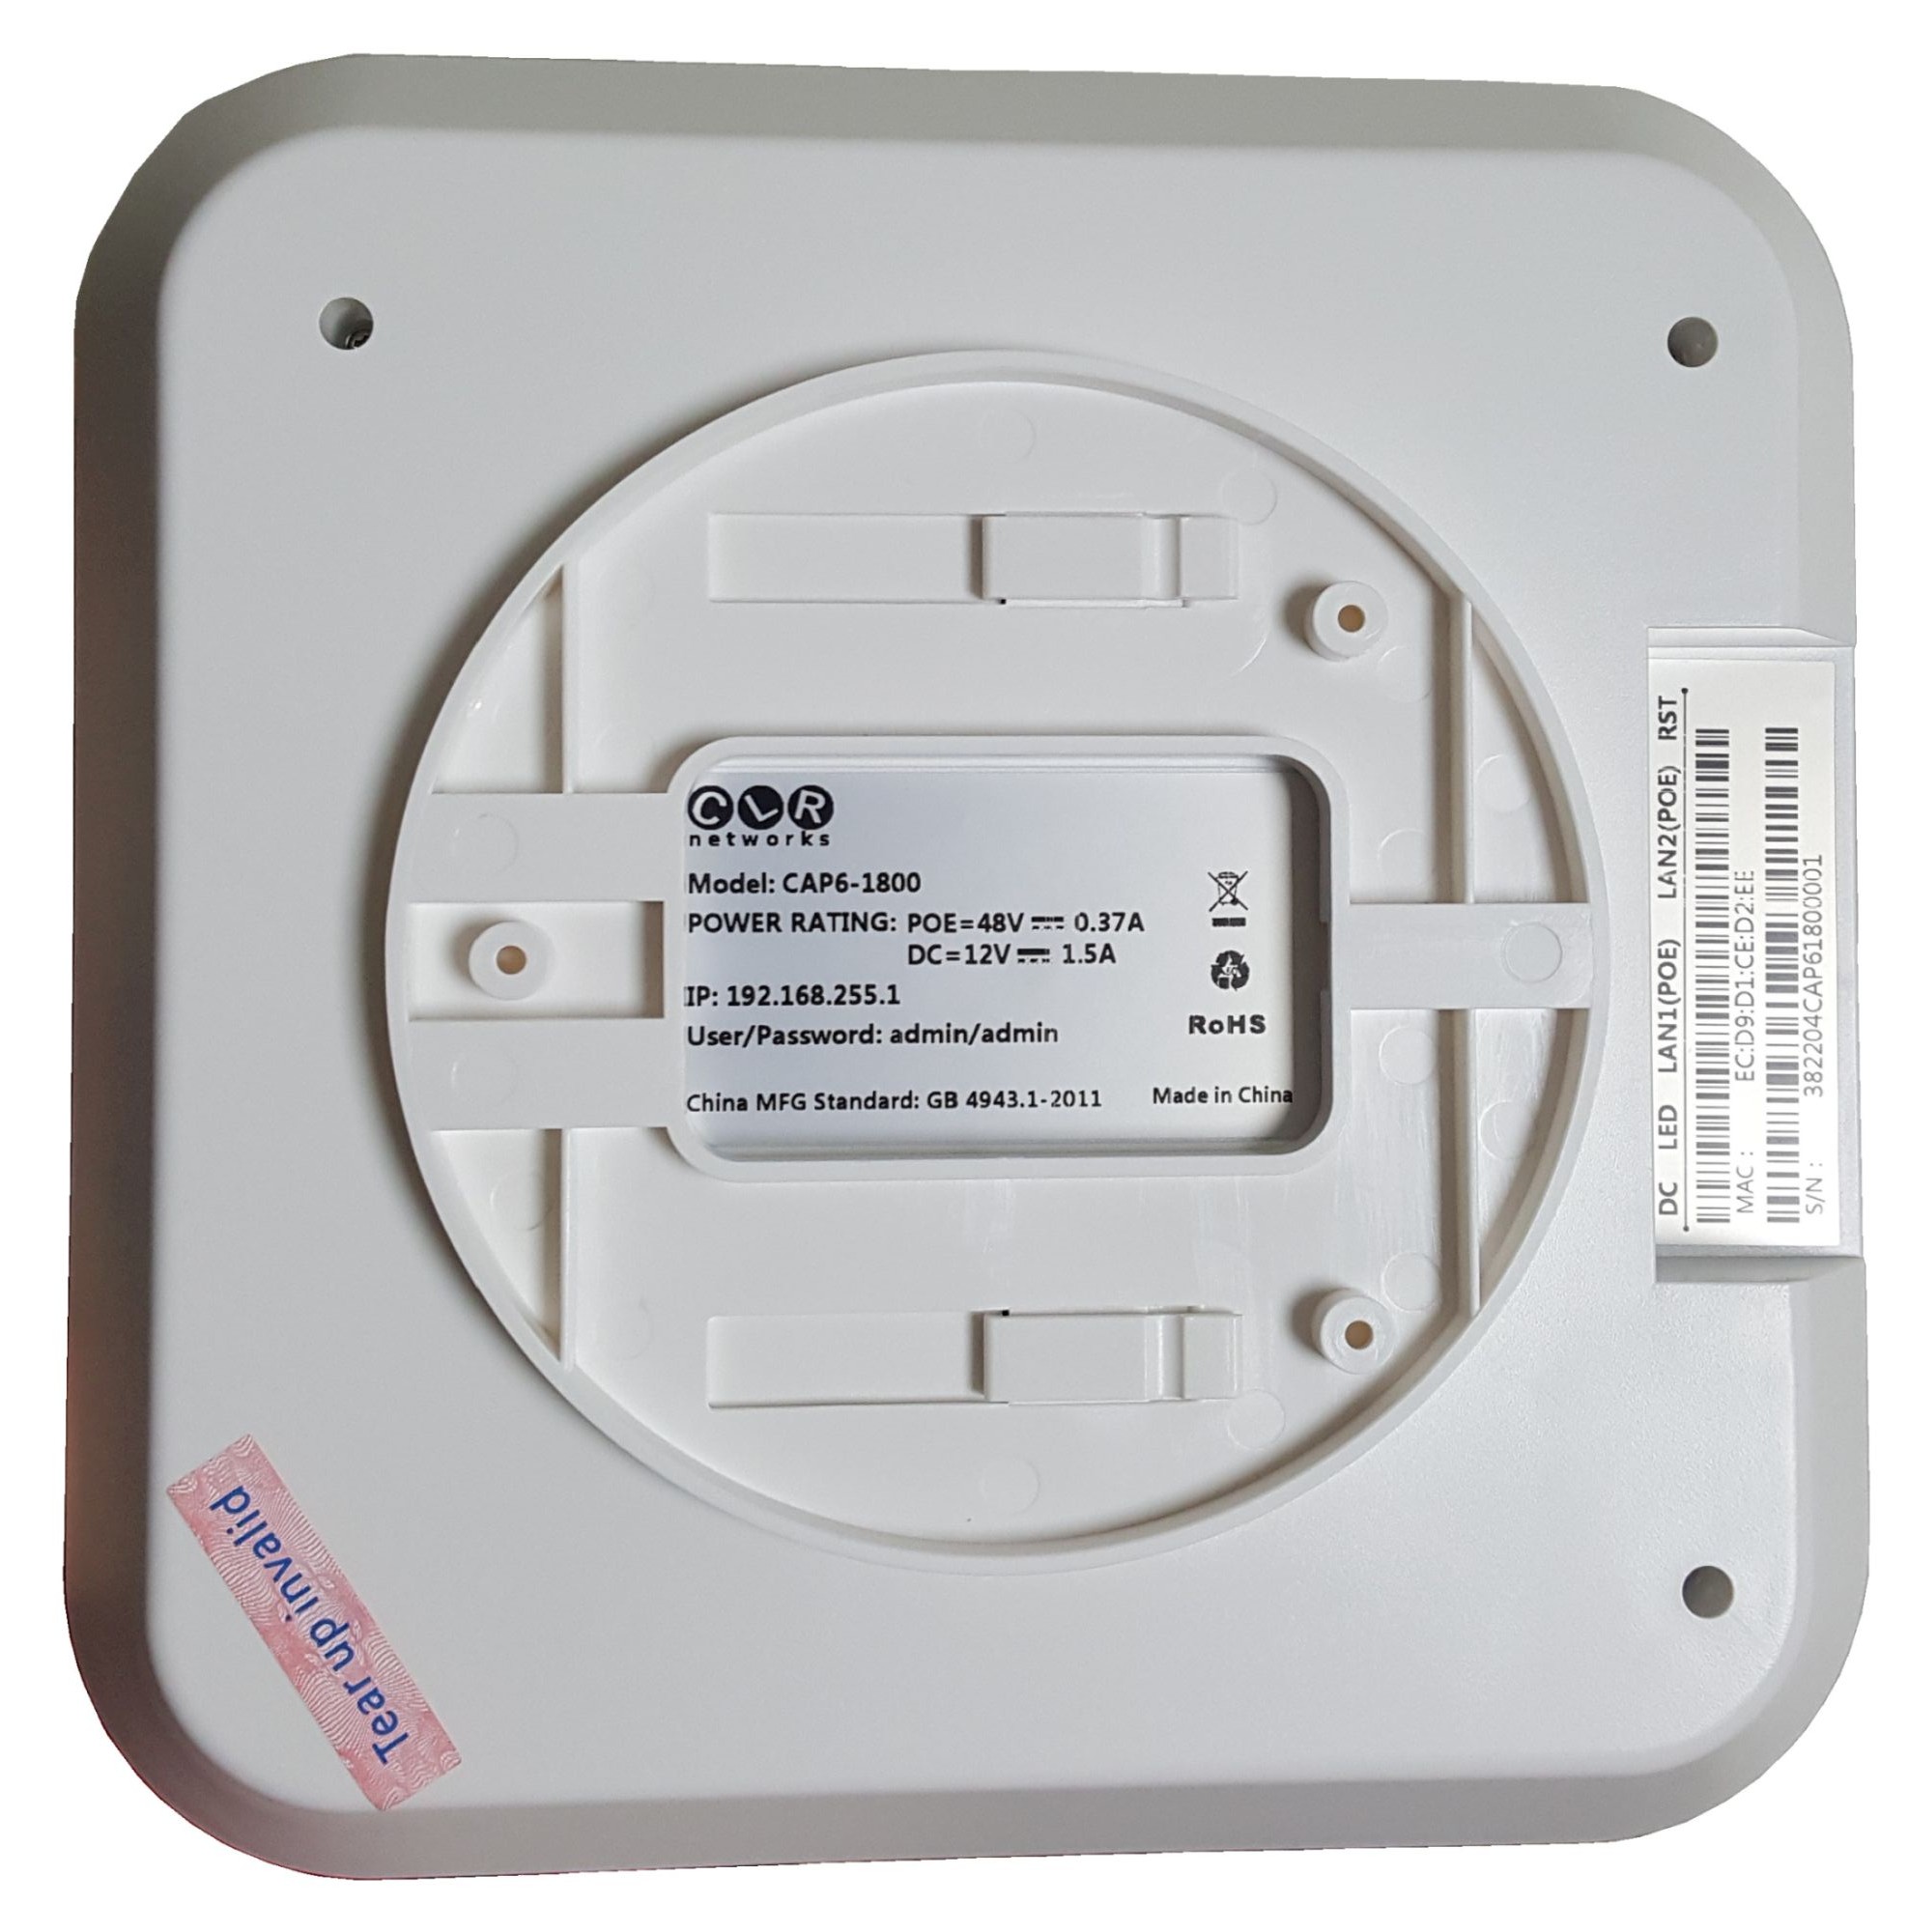 CAP6-1800 Dual Band 1800Mbps Access Point - 4